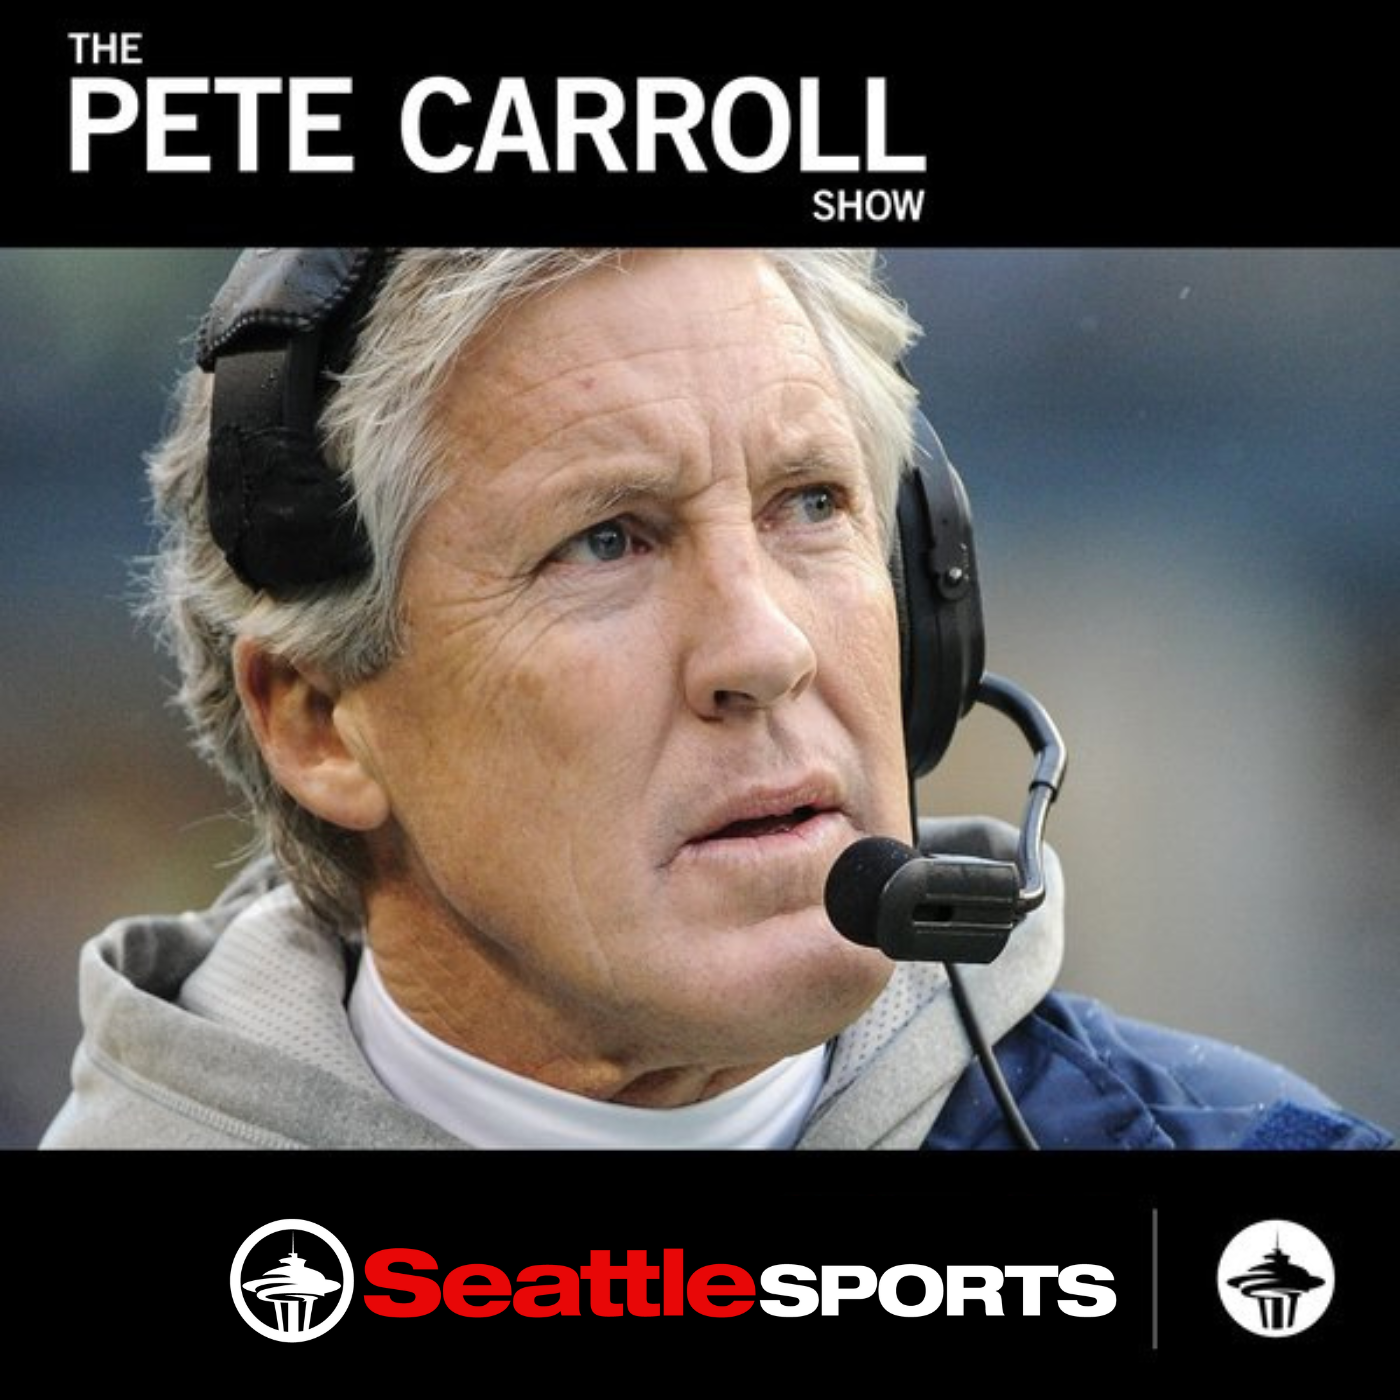 Pete Carroll-On Seahawks OT win - "we saw ourselves very clearly."